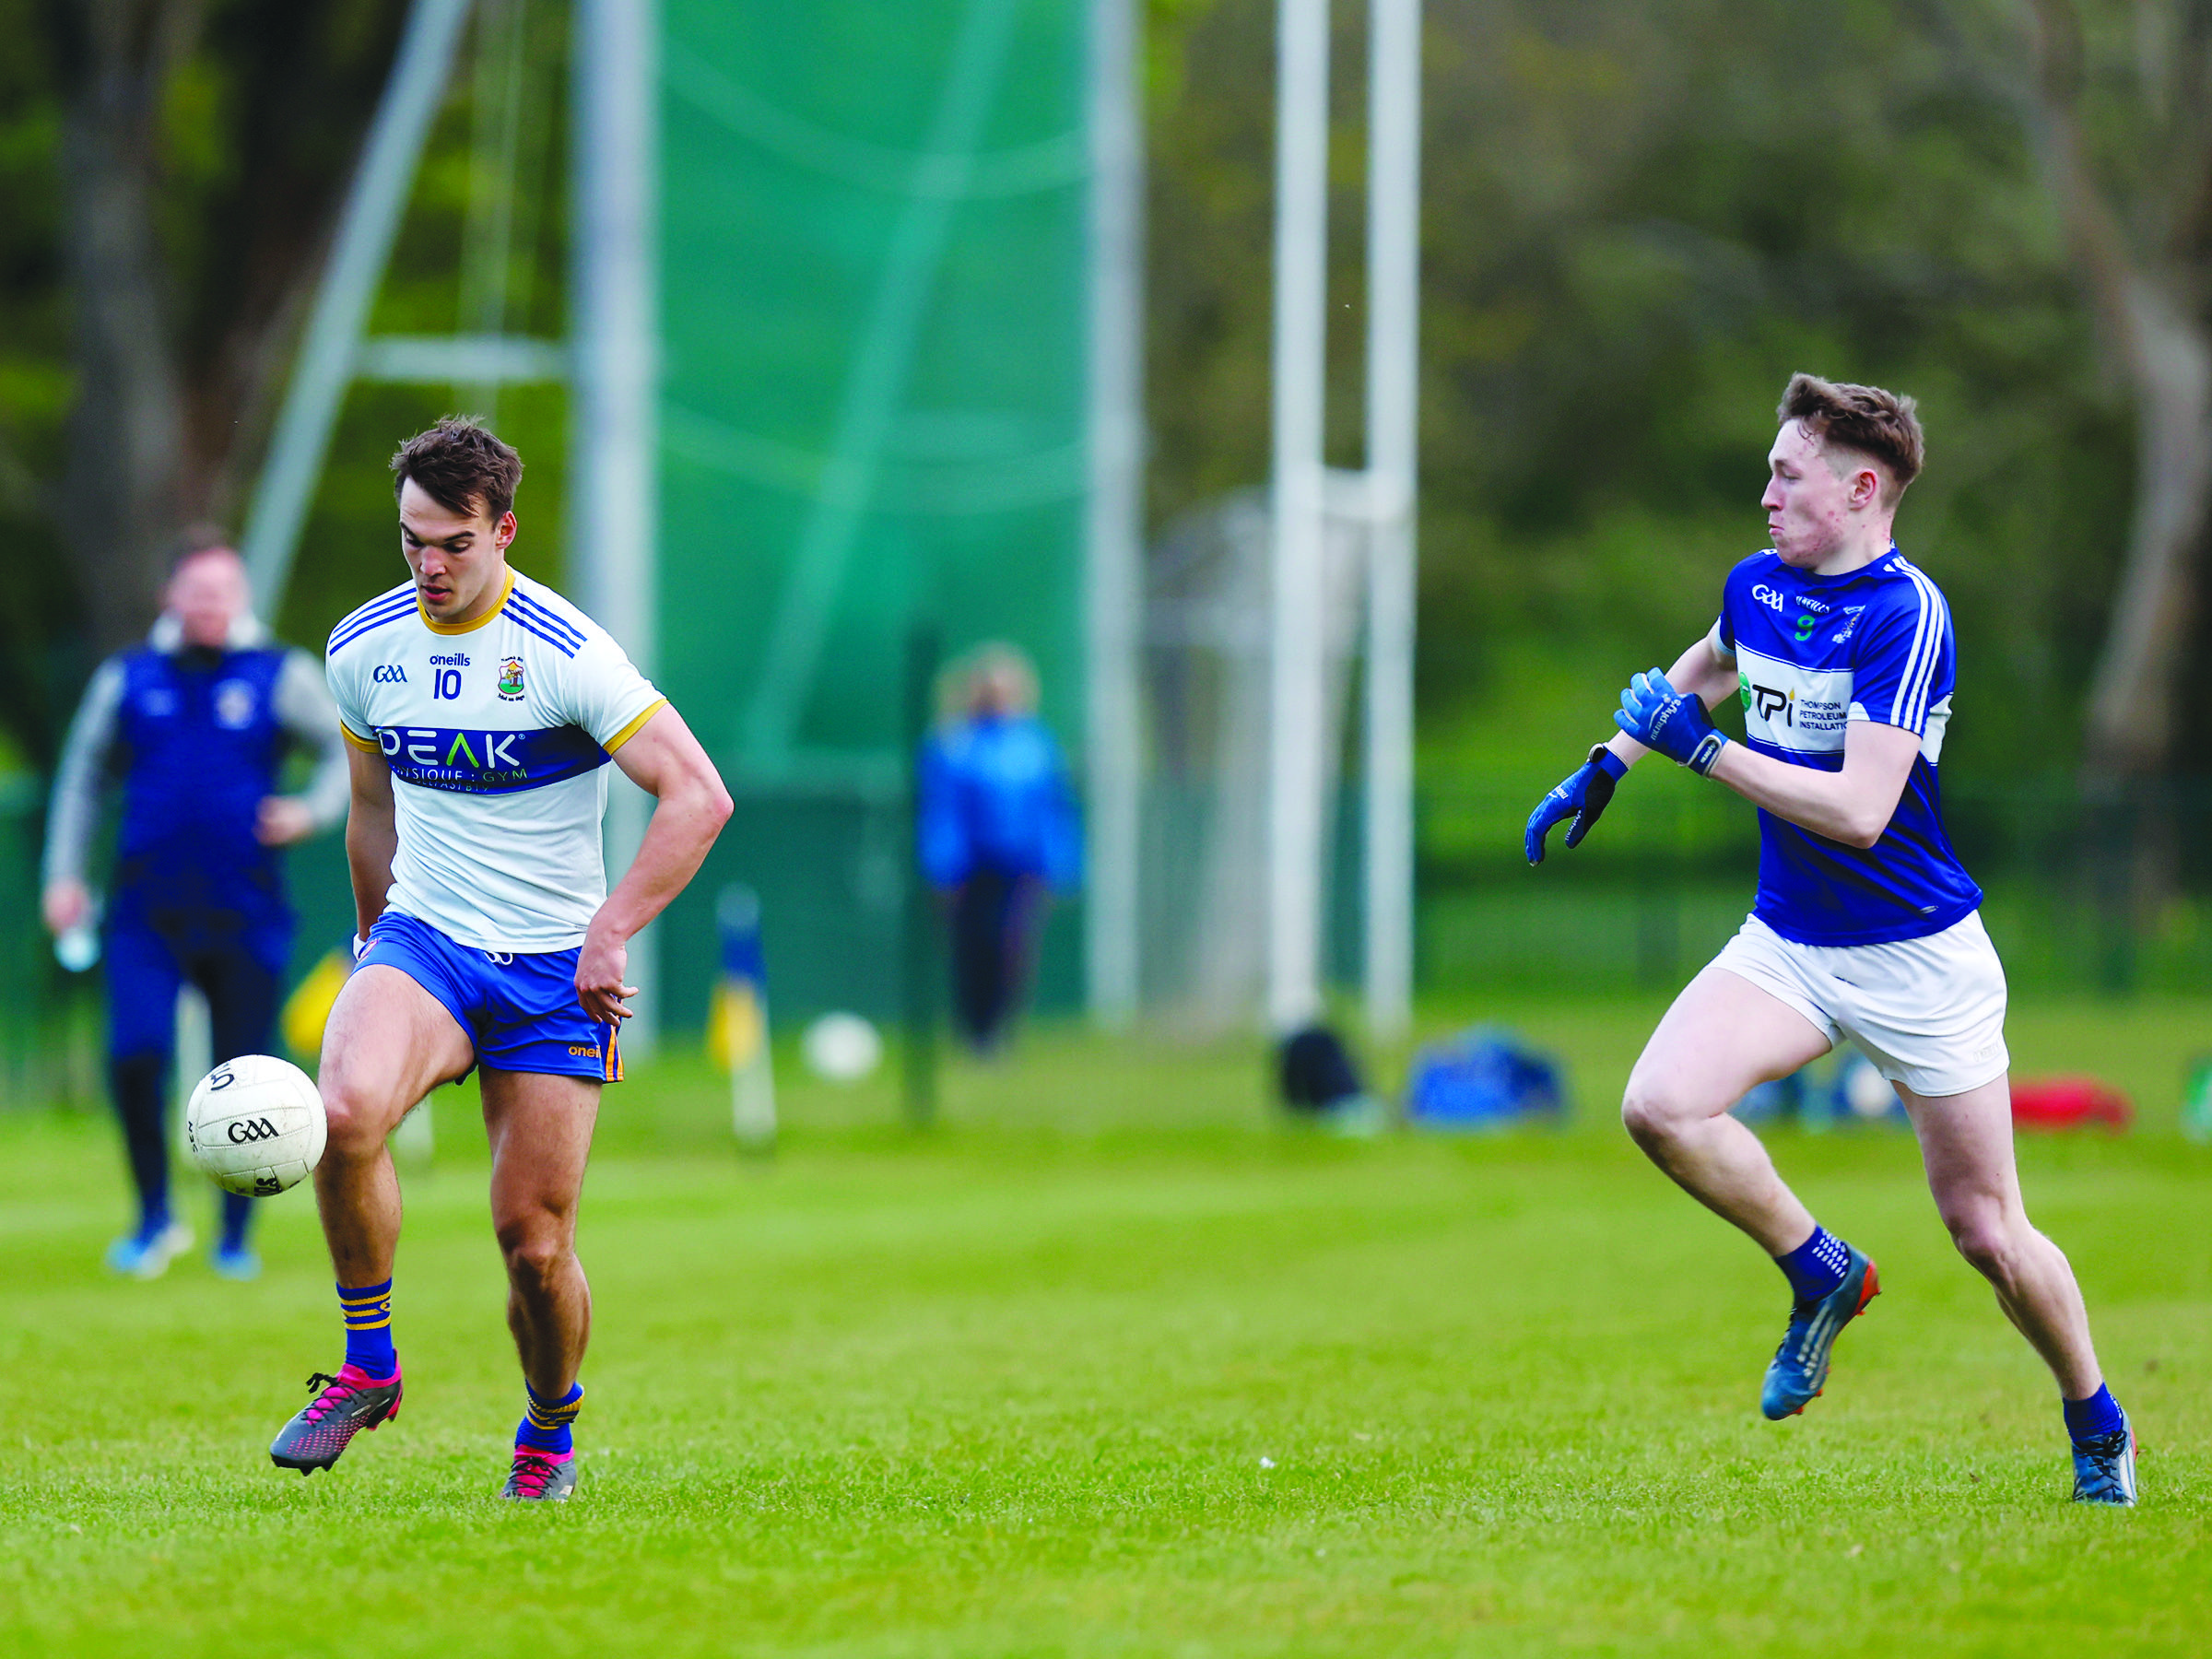 FIXTURES: 2023 Down GAA ACFL Division 1 (Sponsored by O'Neills)